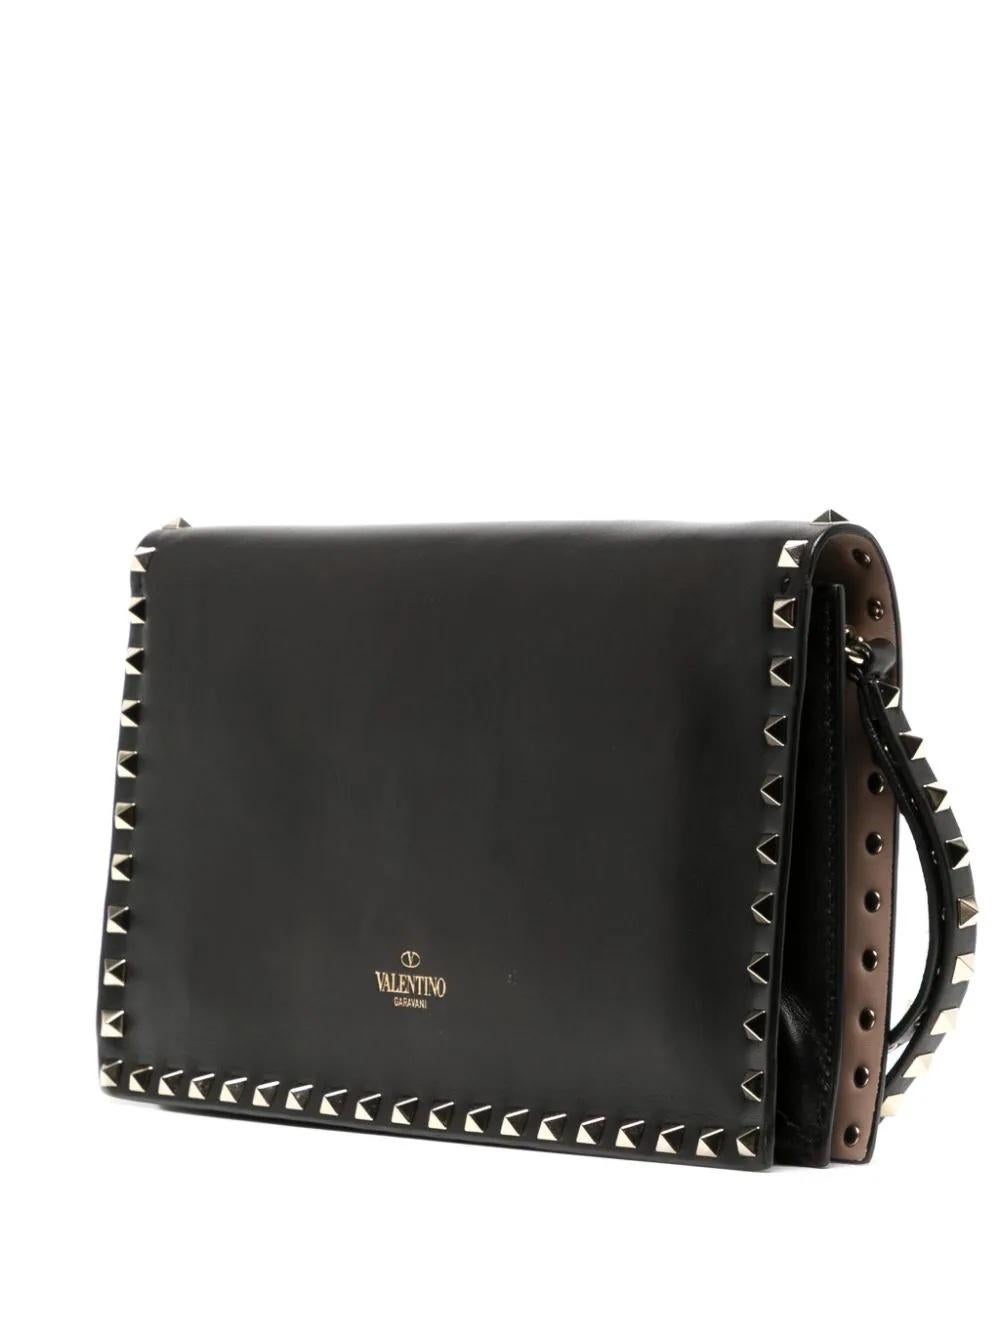 The Valentino Rockstud Leather Clutch Bag is a stunning and versatile accessory that combines edgy style with timeless elegance effortlessly. The bag features Valentino's iconic pyramid-shaped Rockstuds, meticulously applied along the edges. The bag